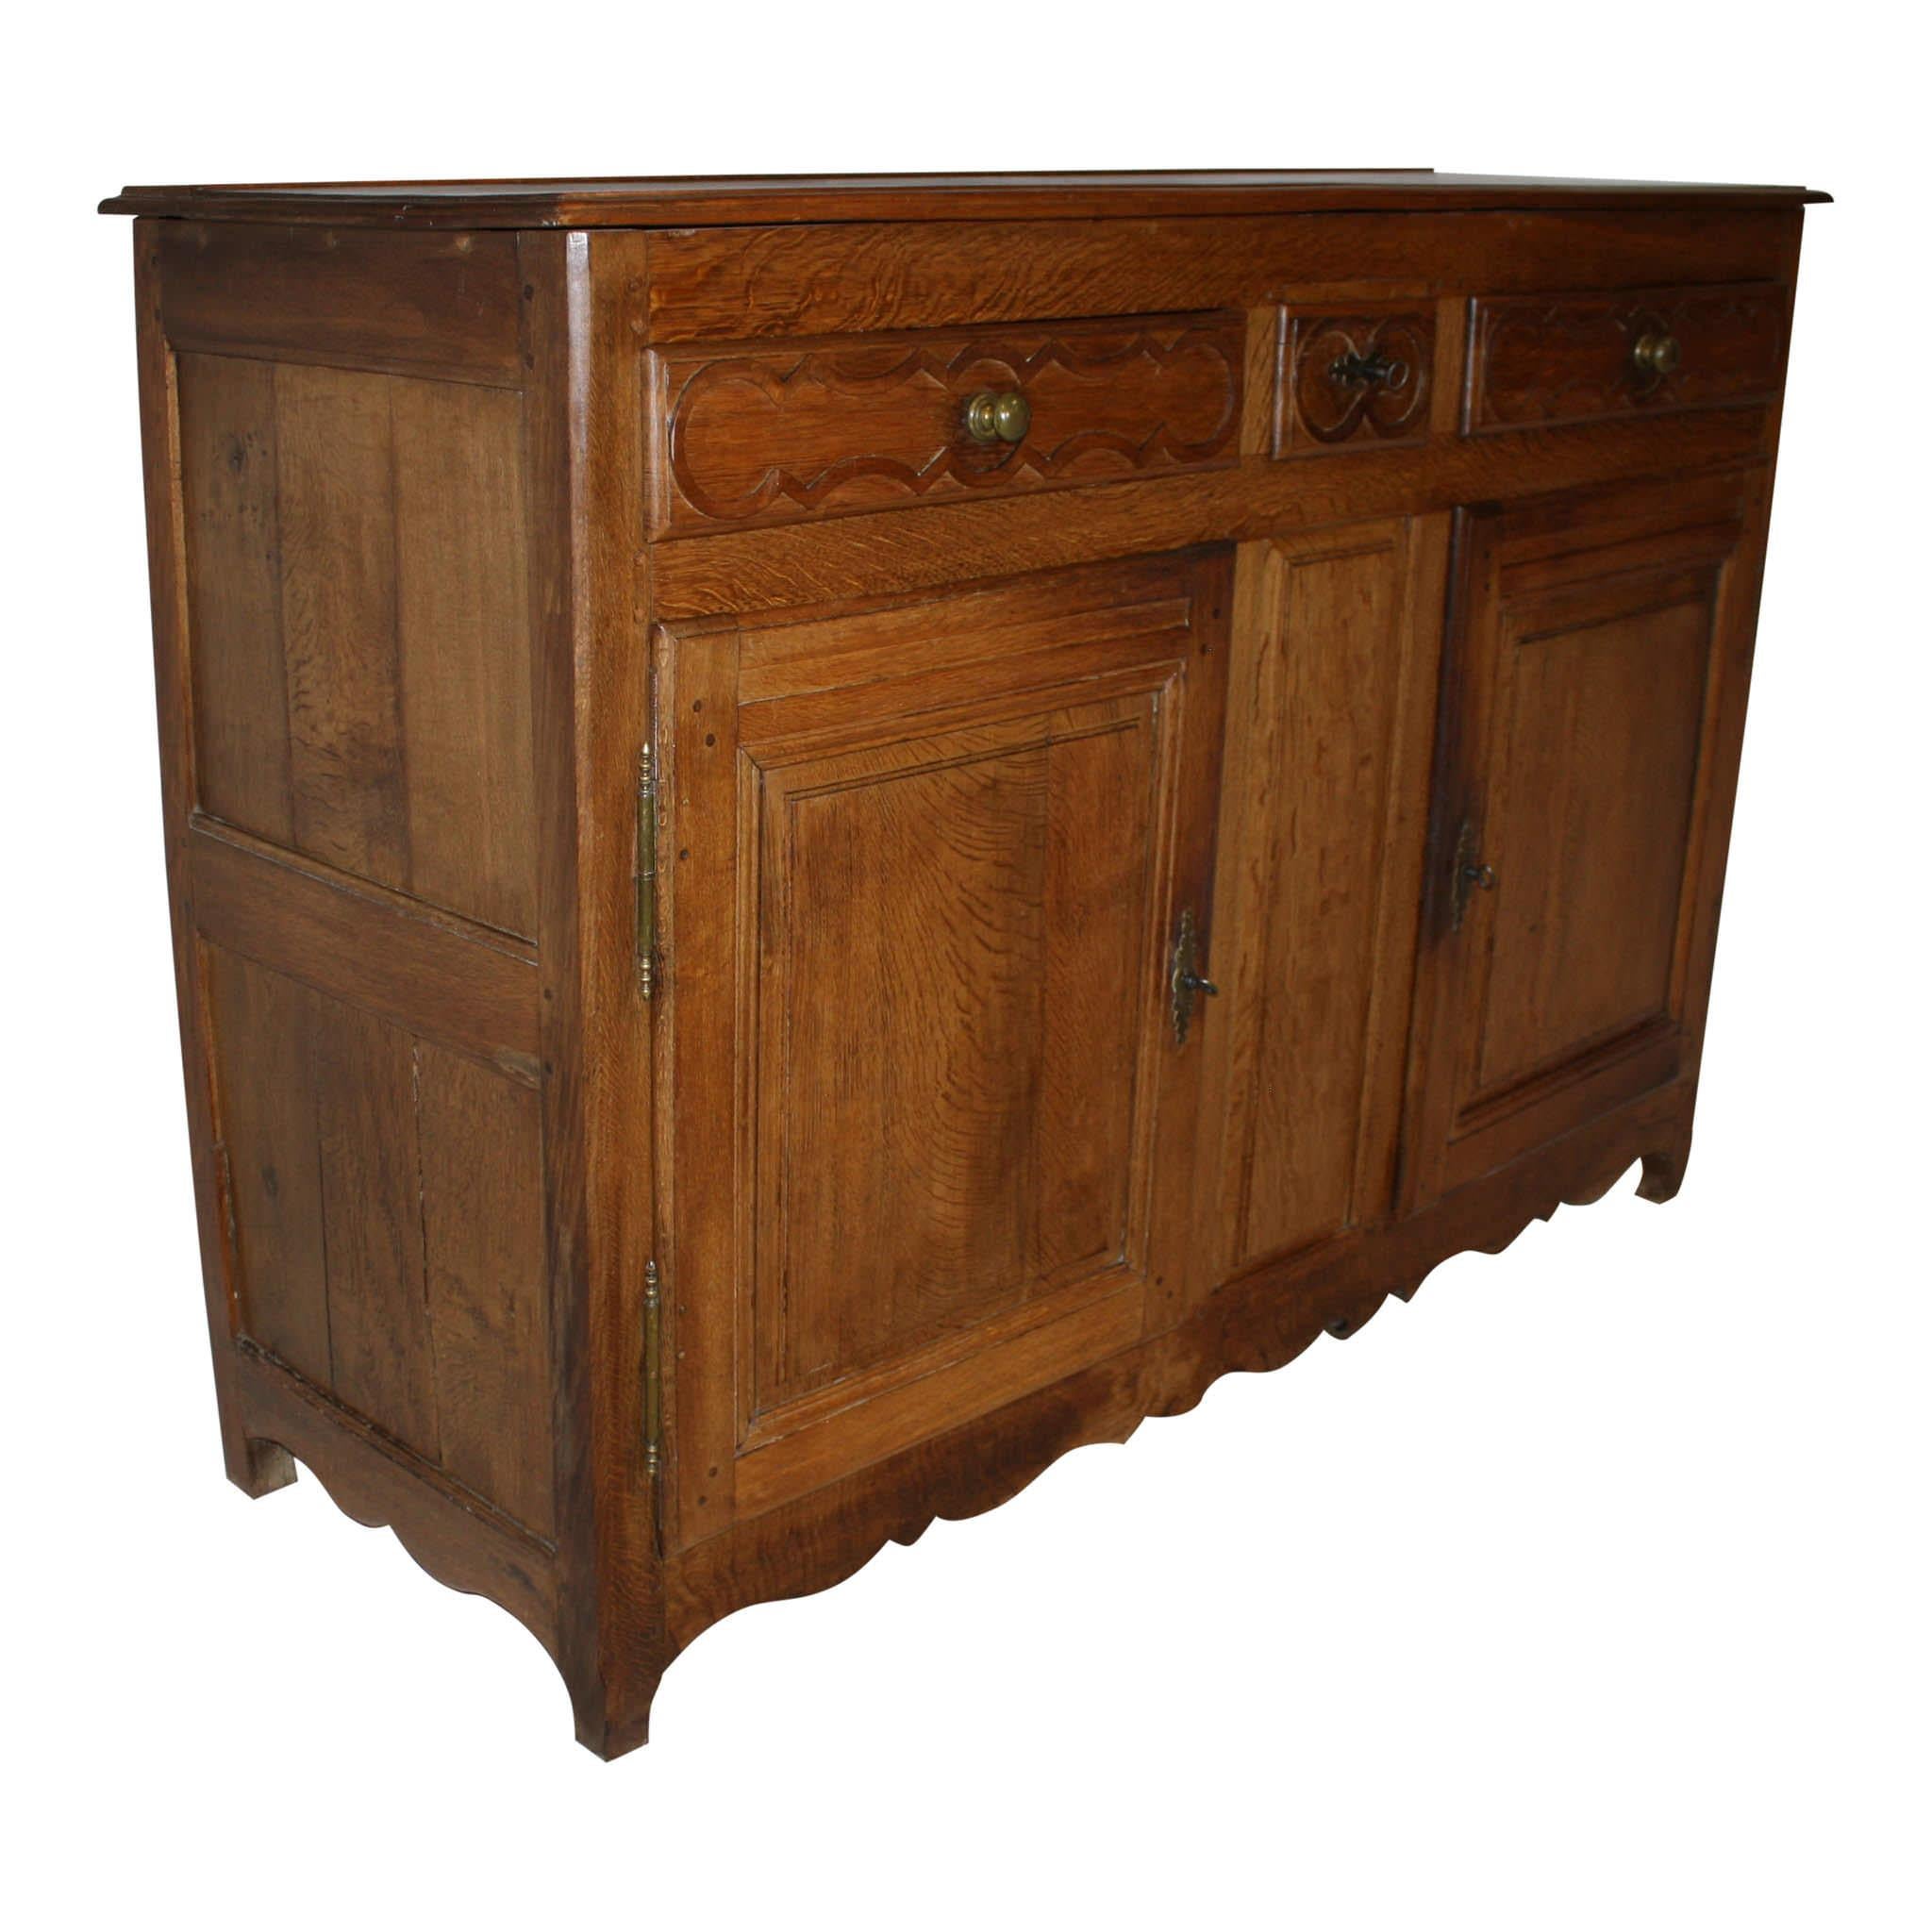 This rustic, oak sideboard, which was crafted in the late 19th century, features a beveled top with a plate groove; a narrow center drawer flanked by wider side drawers with brass knobs; double, raised panel doors with a raised, center panel between